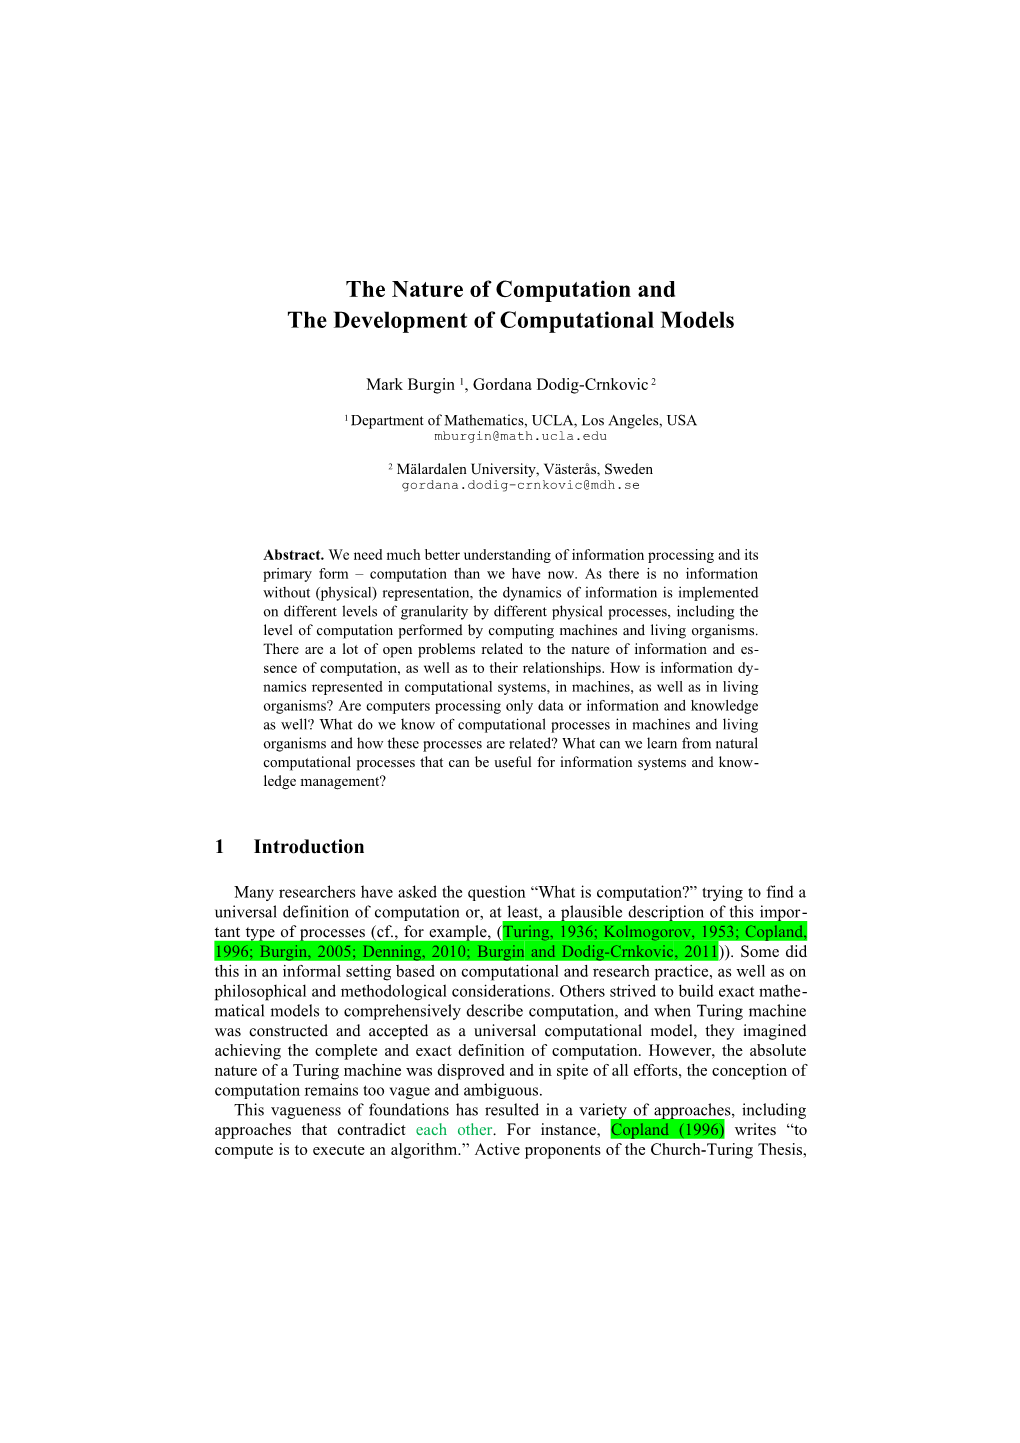 The Nature of Computation and the Development of Computational Models